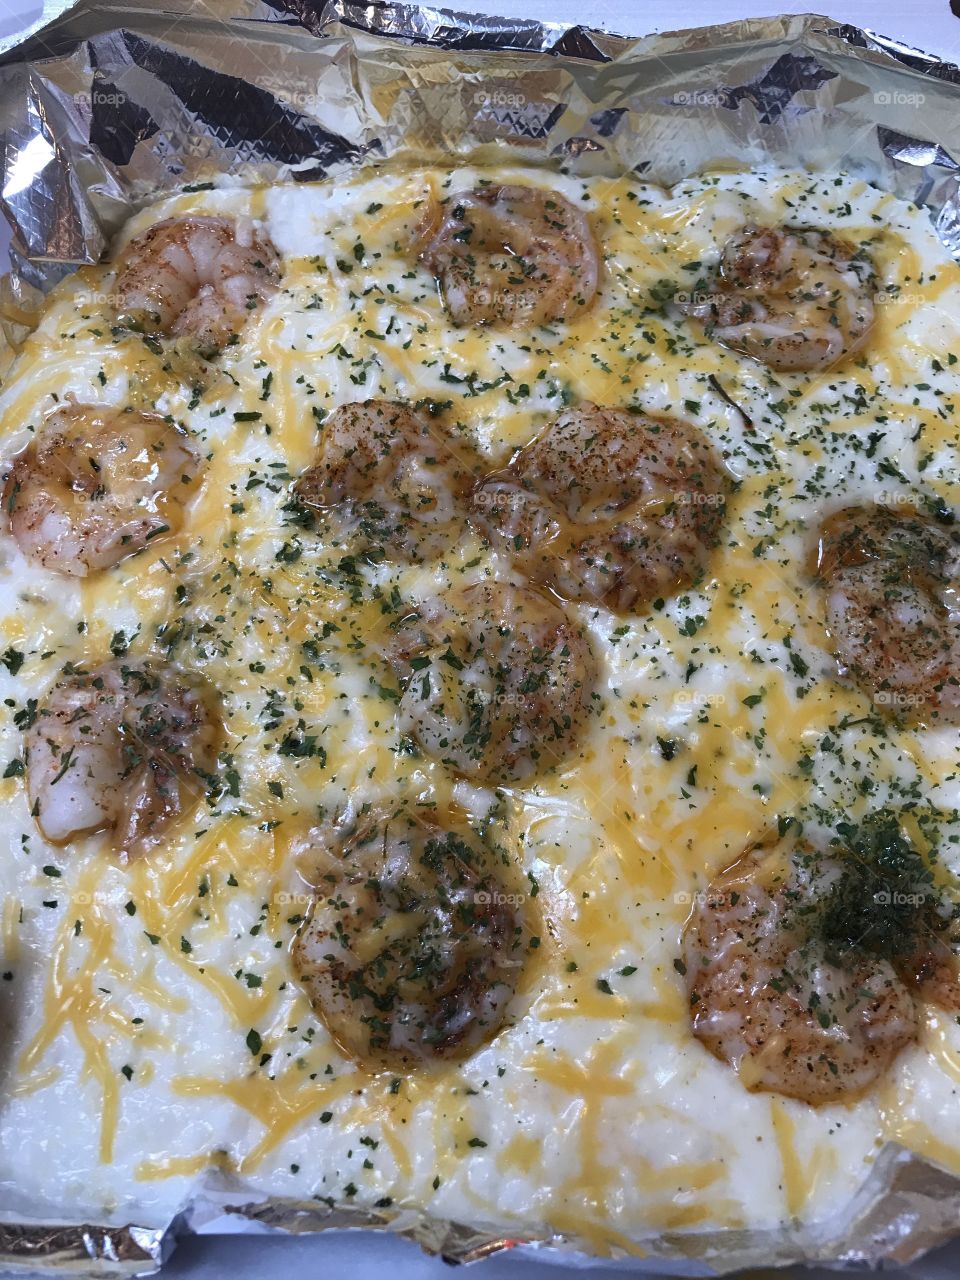 Shrimp and grits 🤤